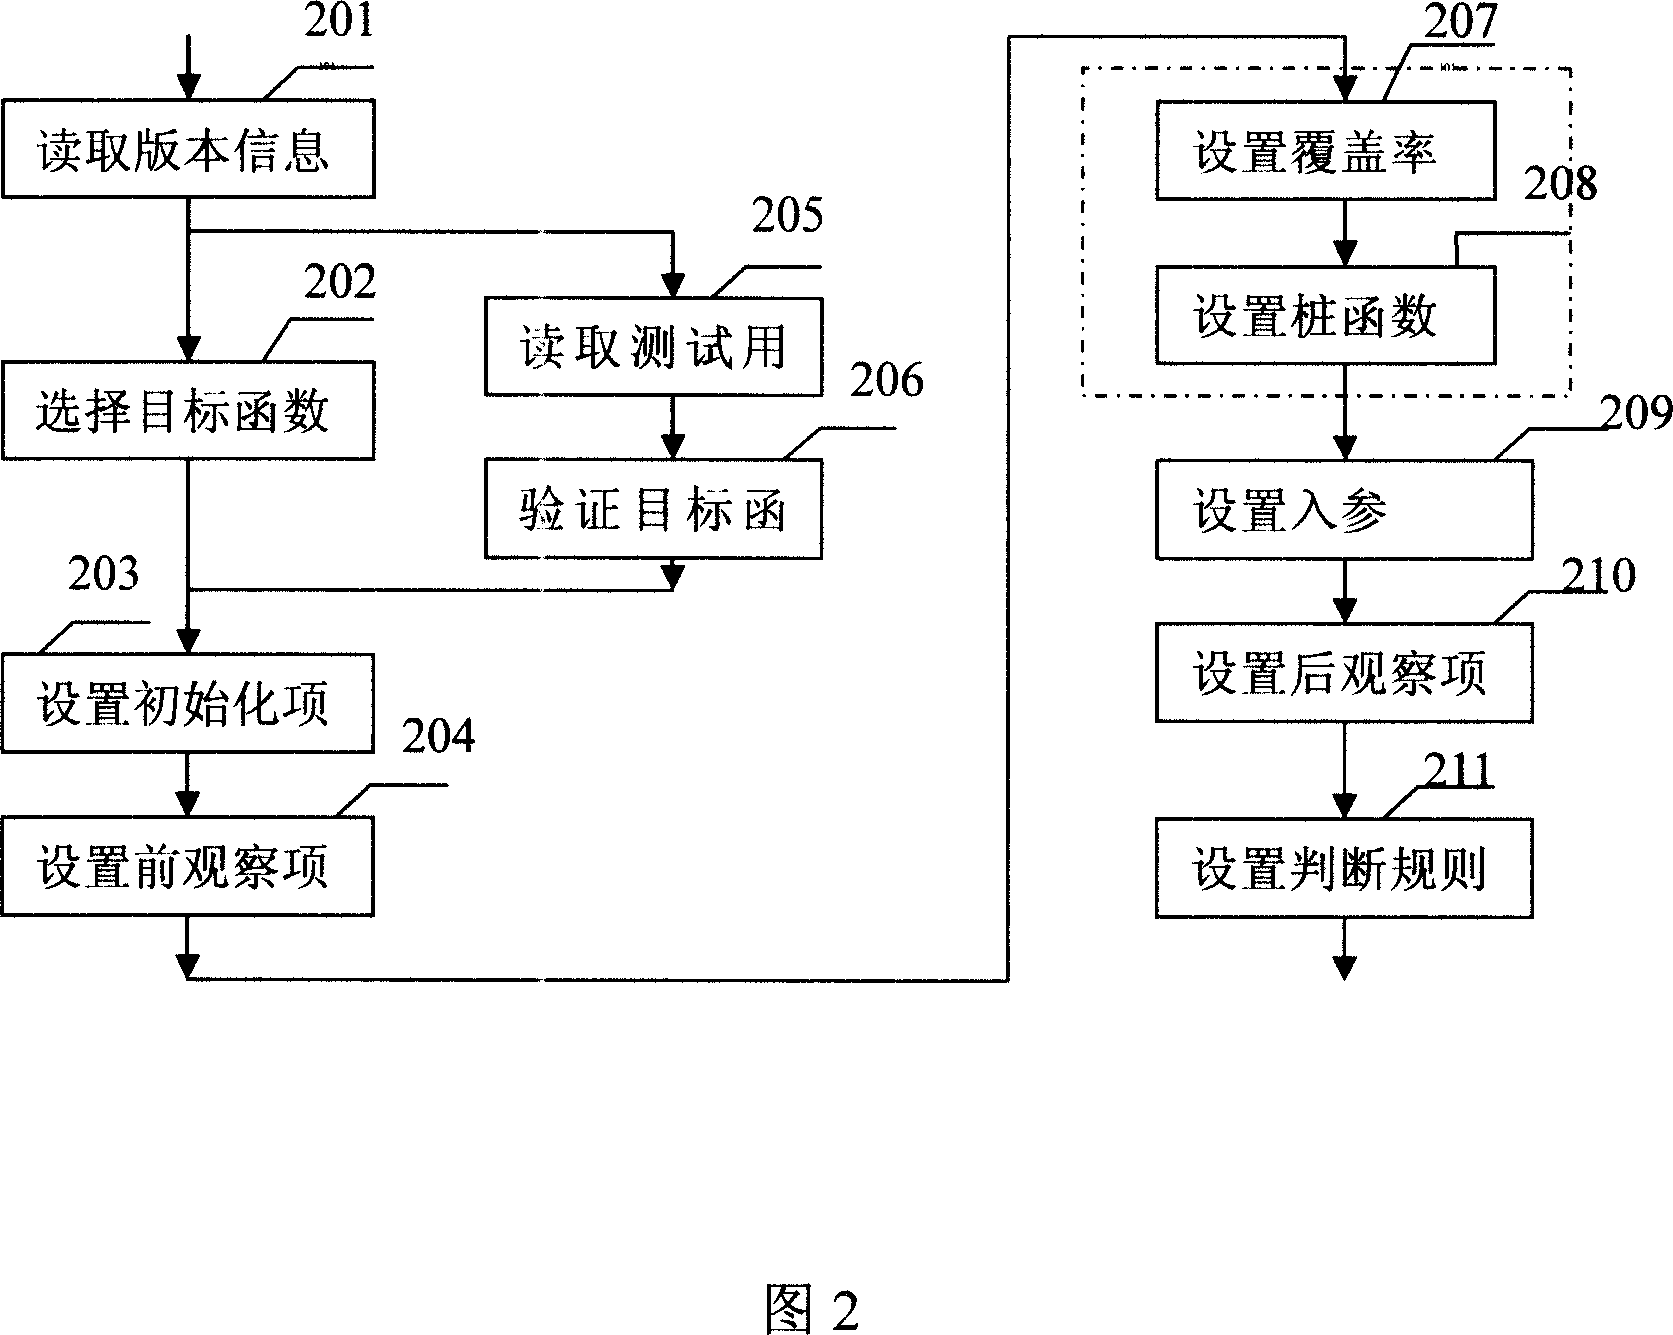 Software test automated system based on apparatus and the method